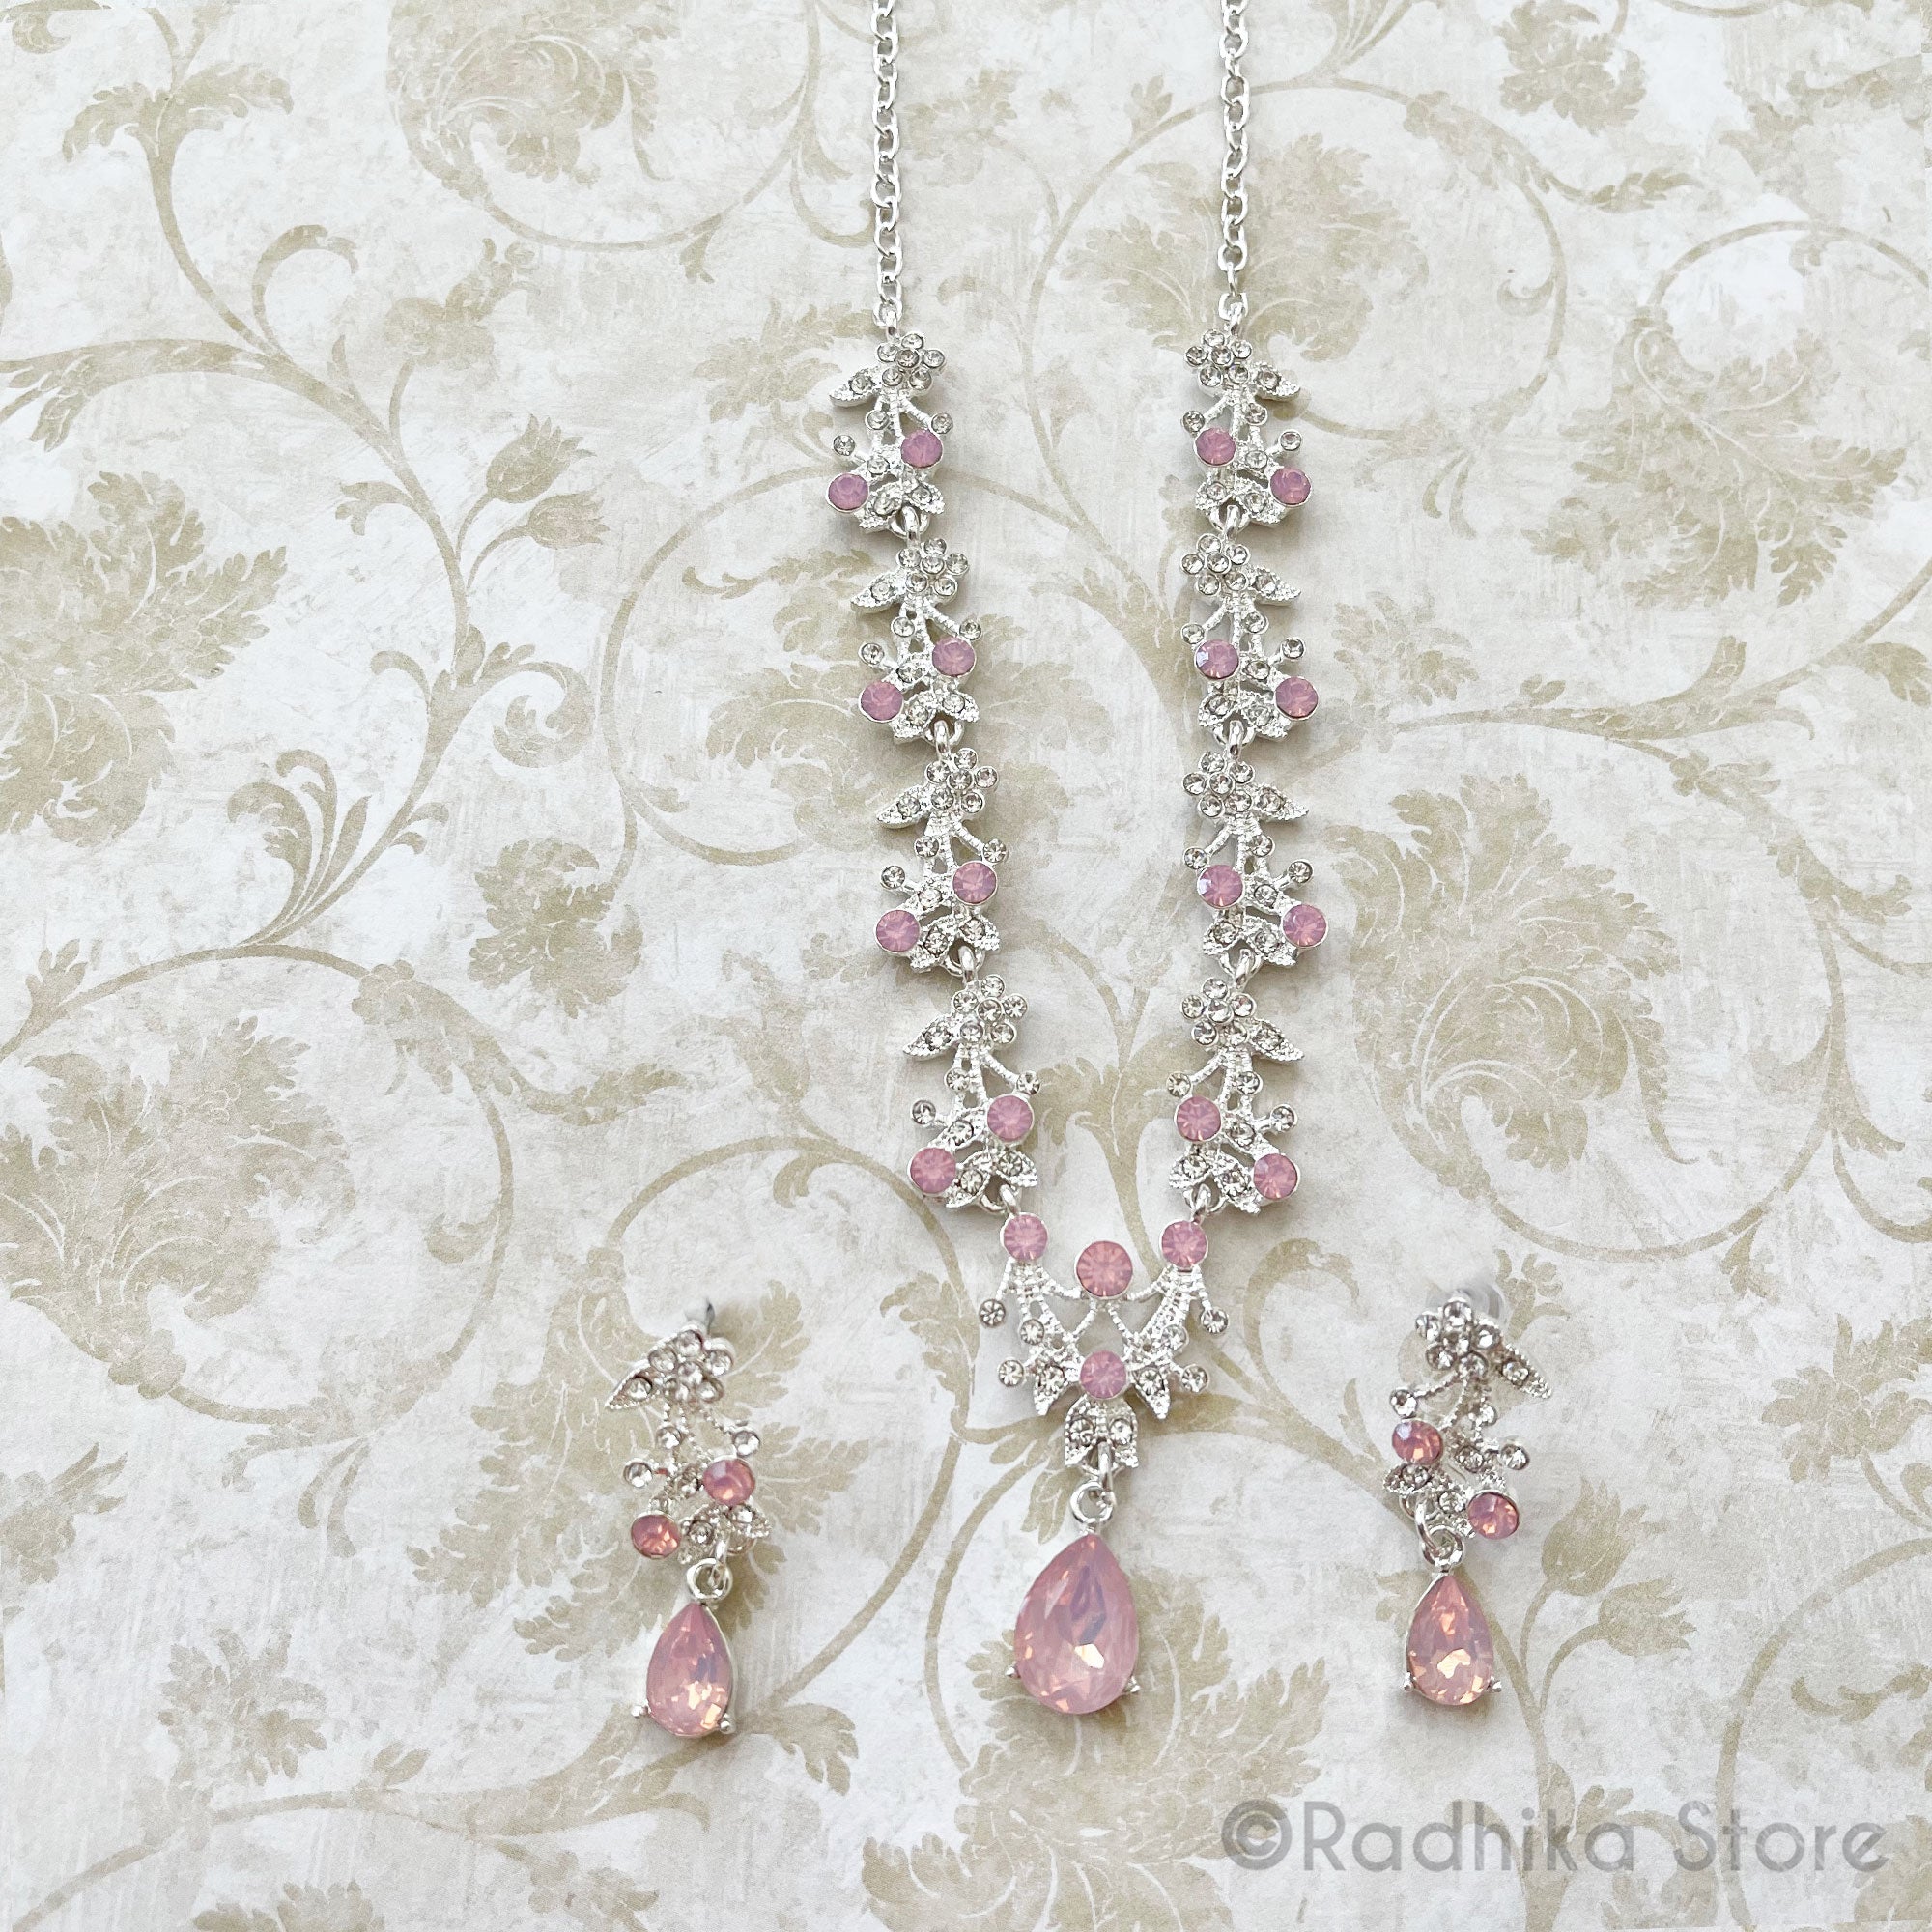 Vrindavan Dew Drops-Rhinestone Deity Necklace And Earring Set- Coral Pink